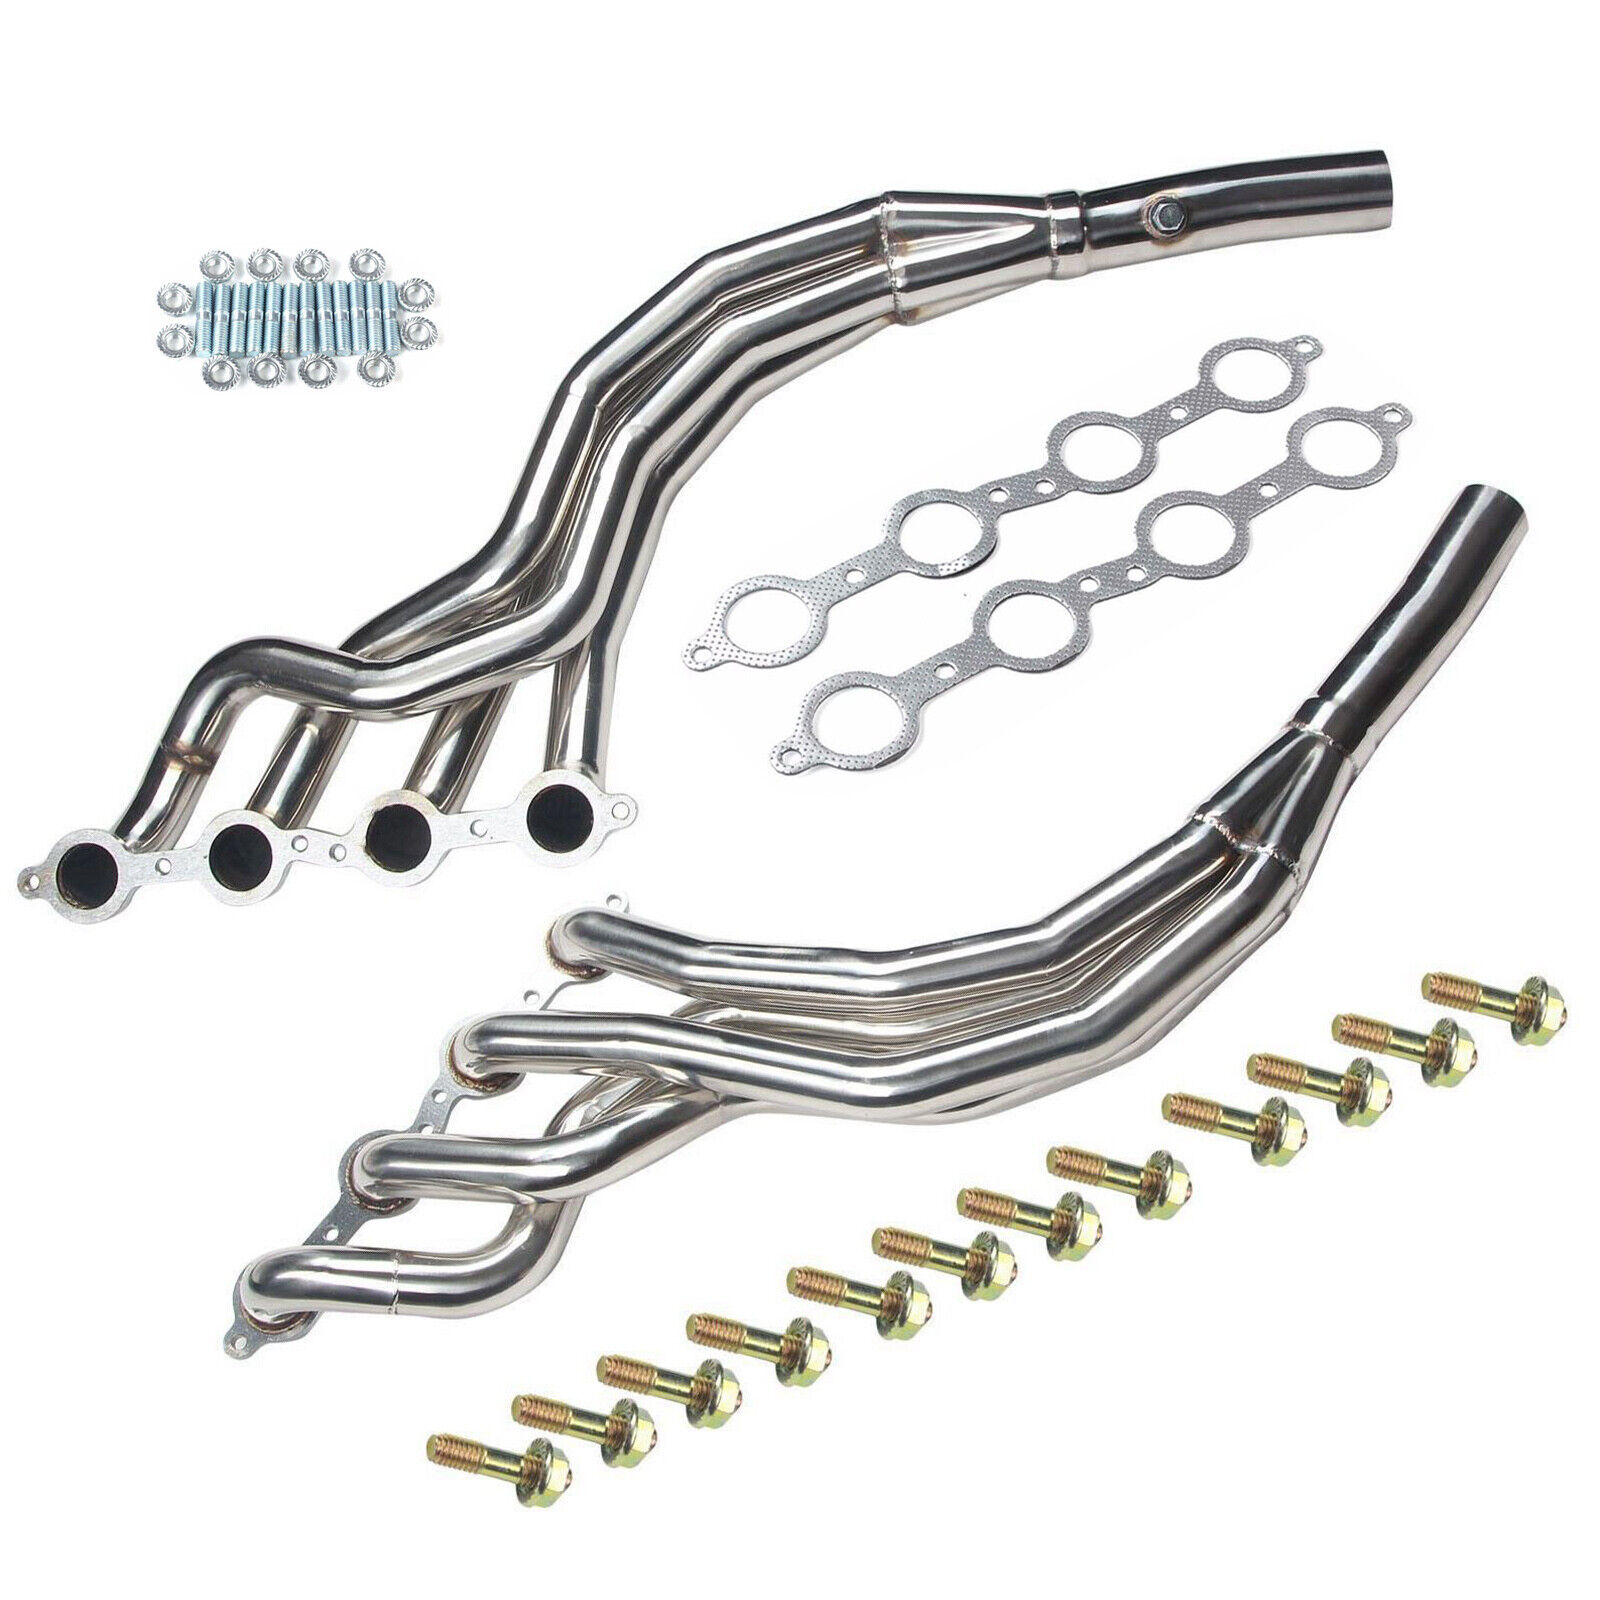 NEW 1× Stainless Exhaust Header Kit Fits for Chevy Camaro SS 6.2L V8 10-13 USA